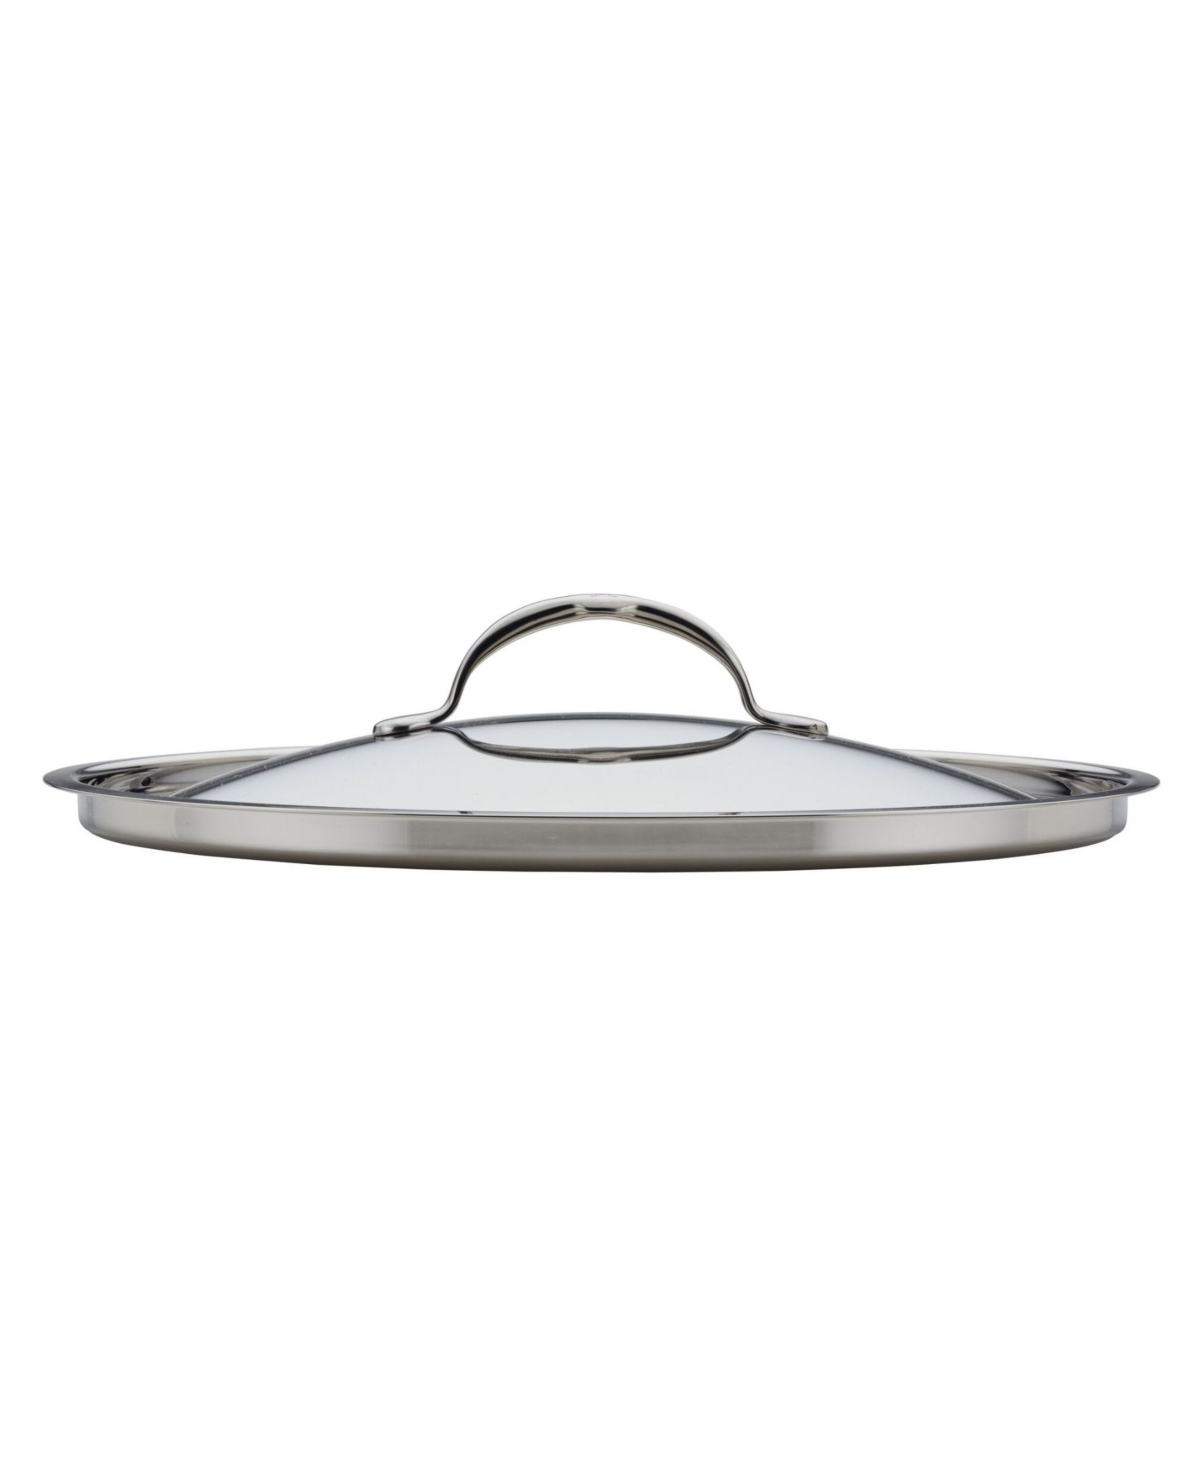 Shop Hestan Provisions Stainless Steel 12.5" Lid